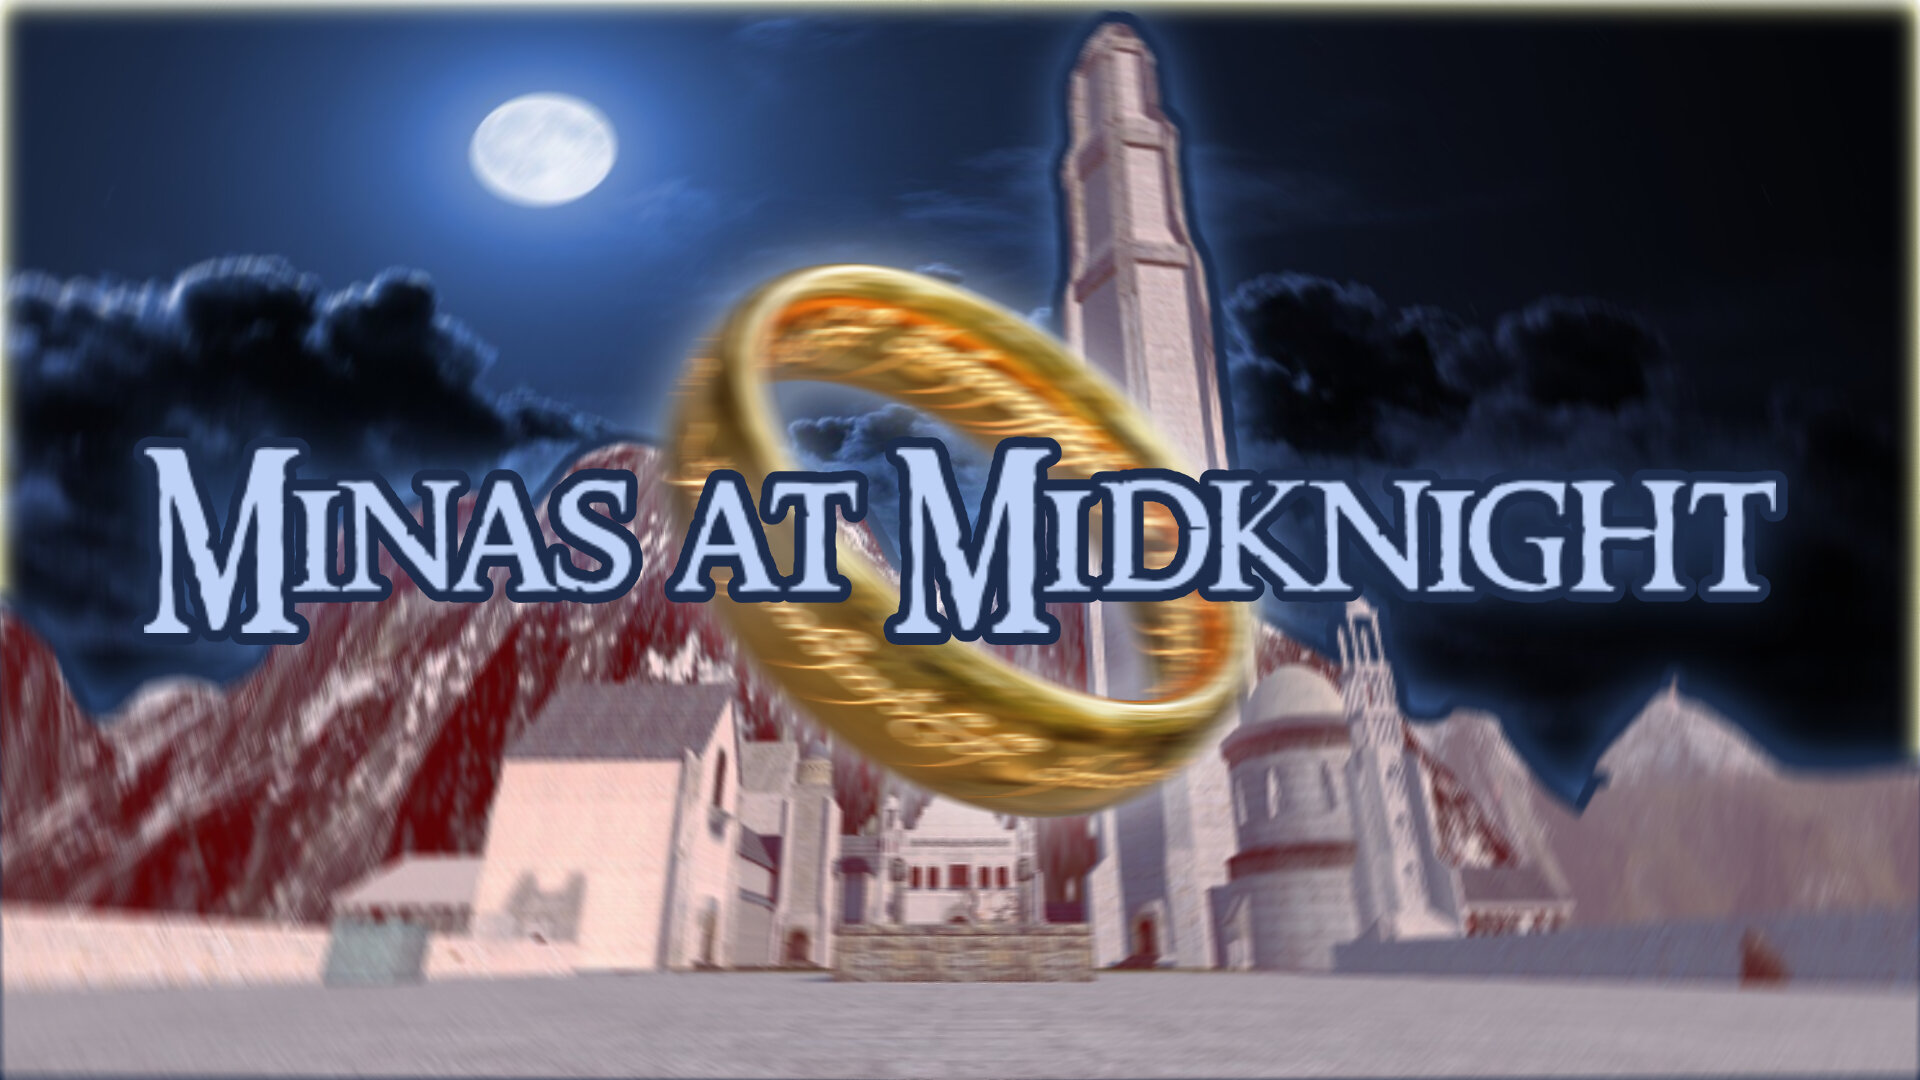 More information about "CS:S Zombie Escape Mini-Event #133 - Minas at Midknight"